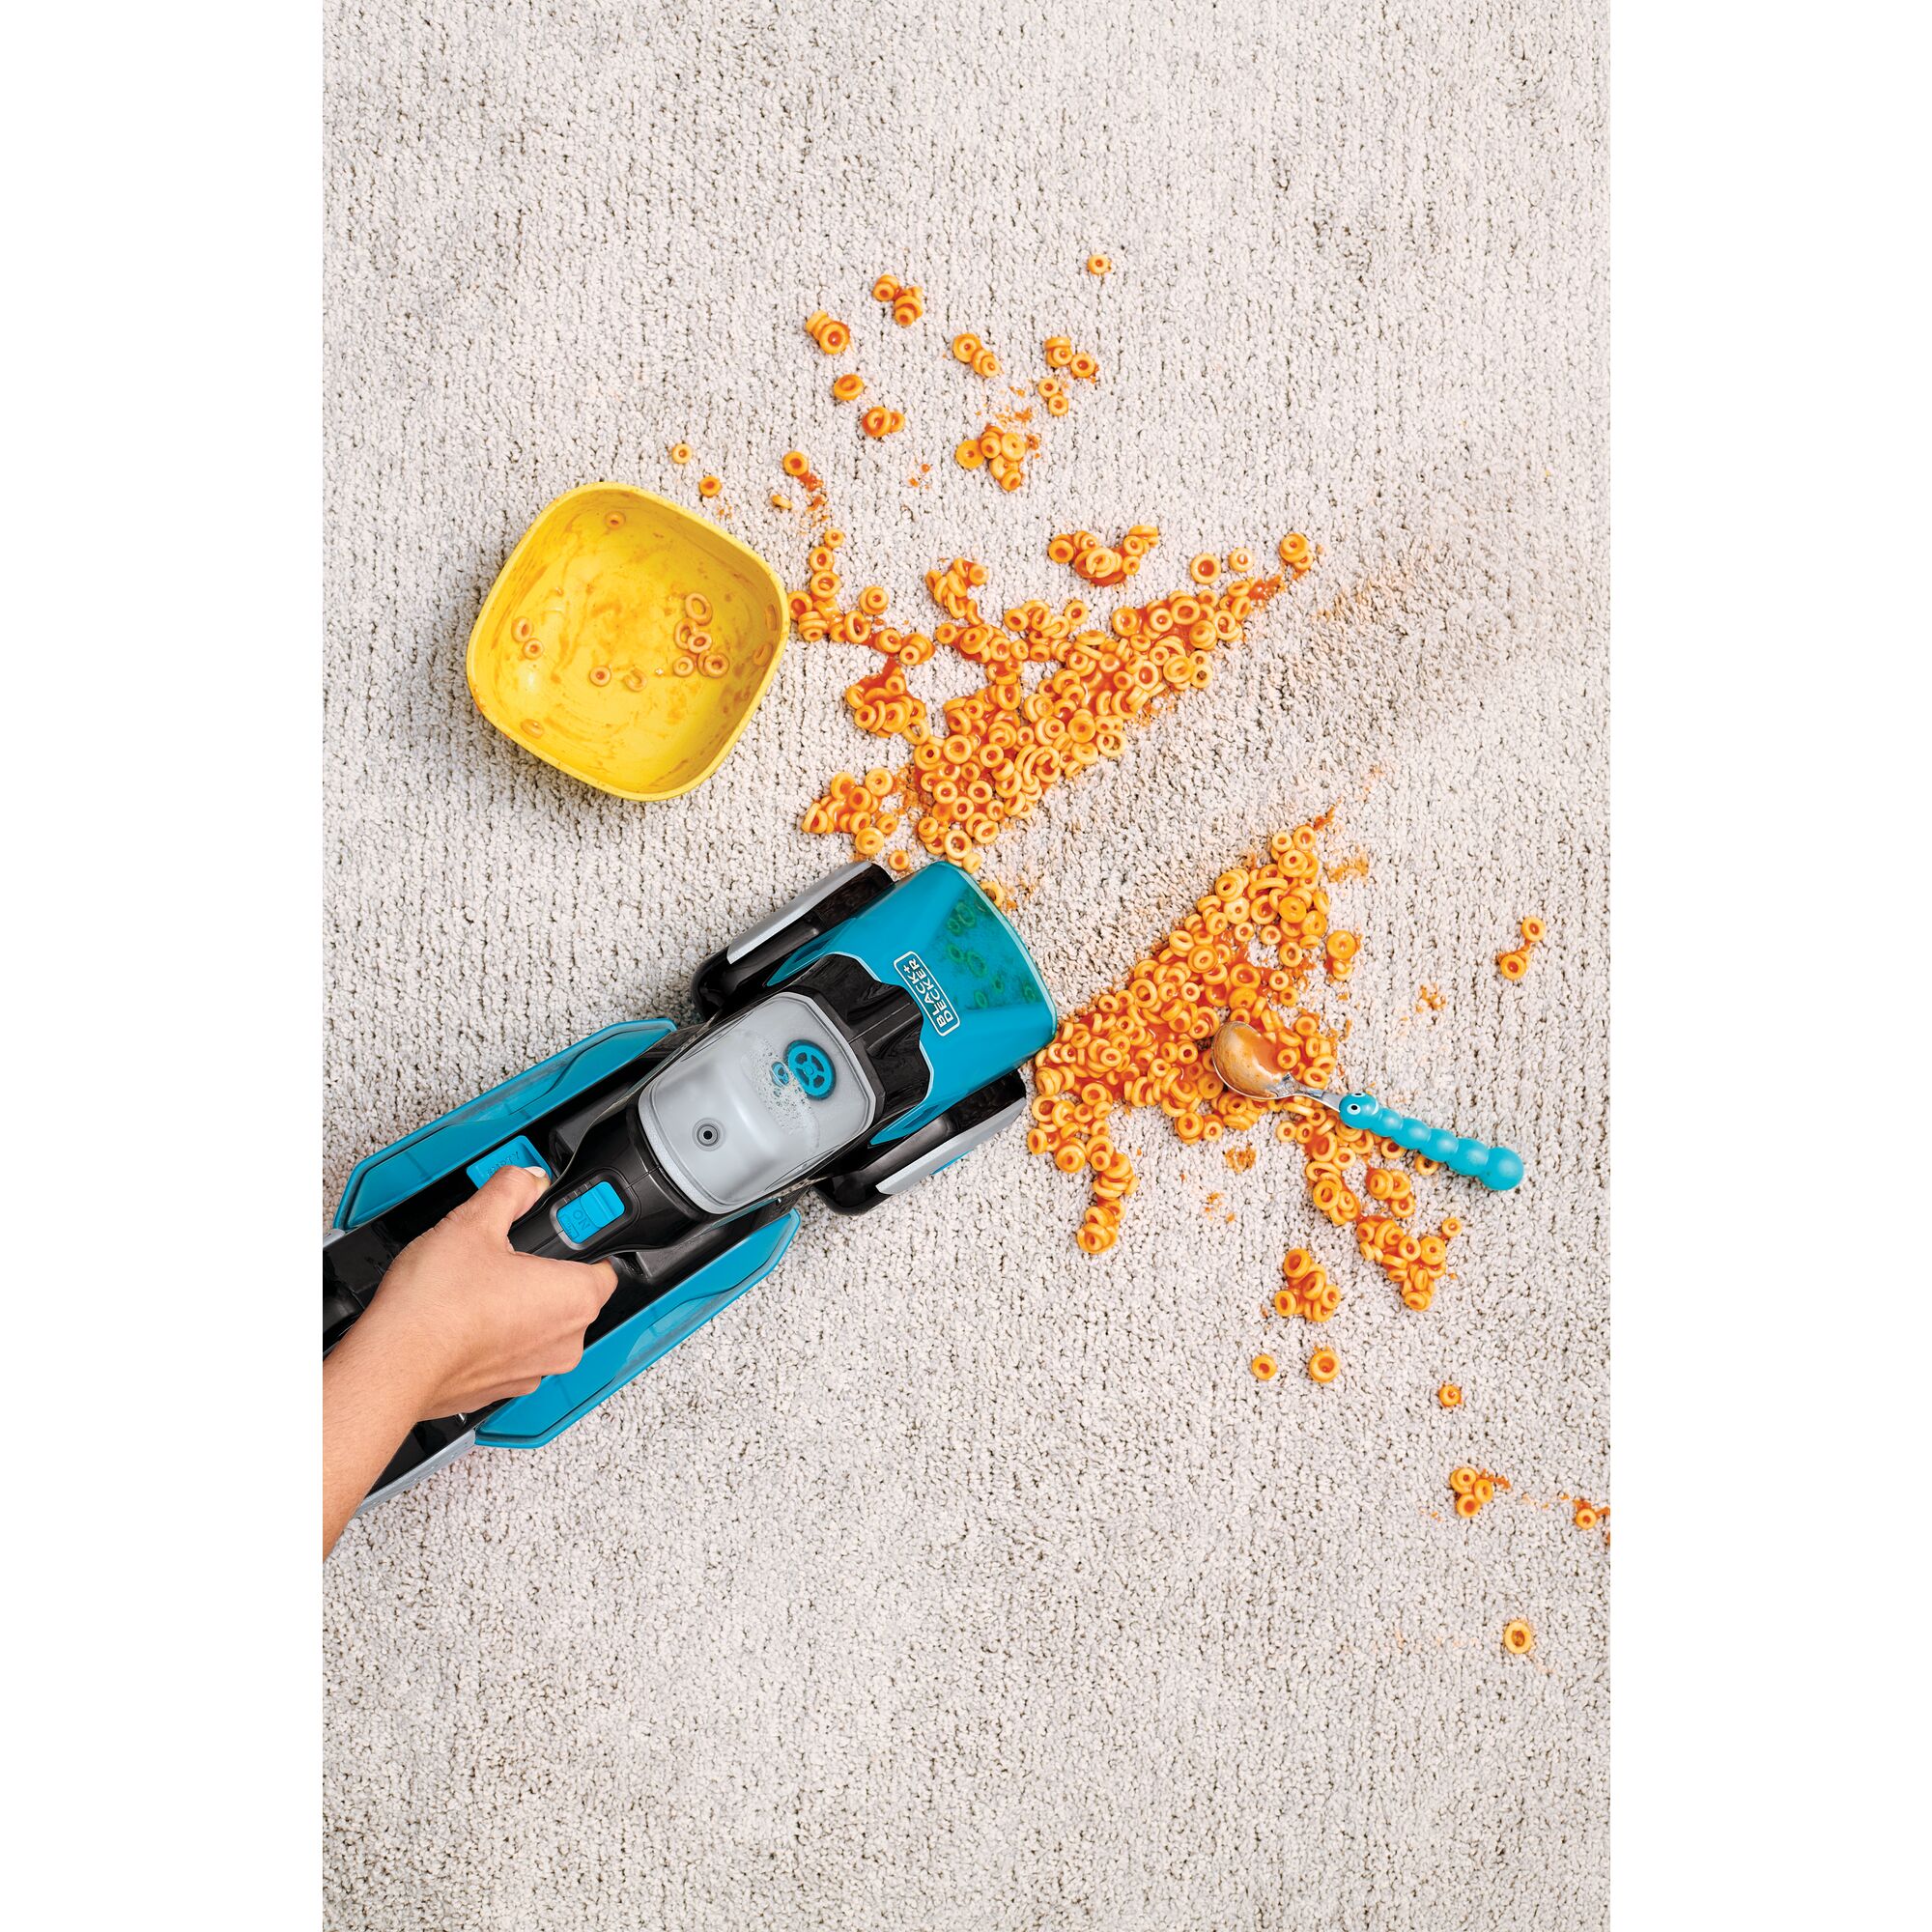 Spillbuster Cordless Spill and Spot Cleaner with Powered Scrub Brush being used to clean spilt food on a carpet.